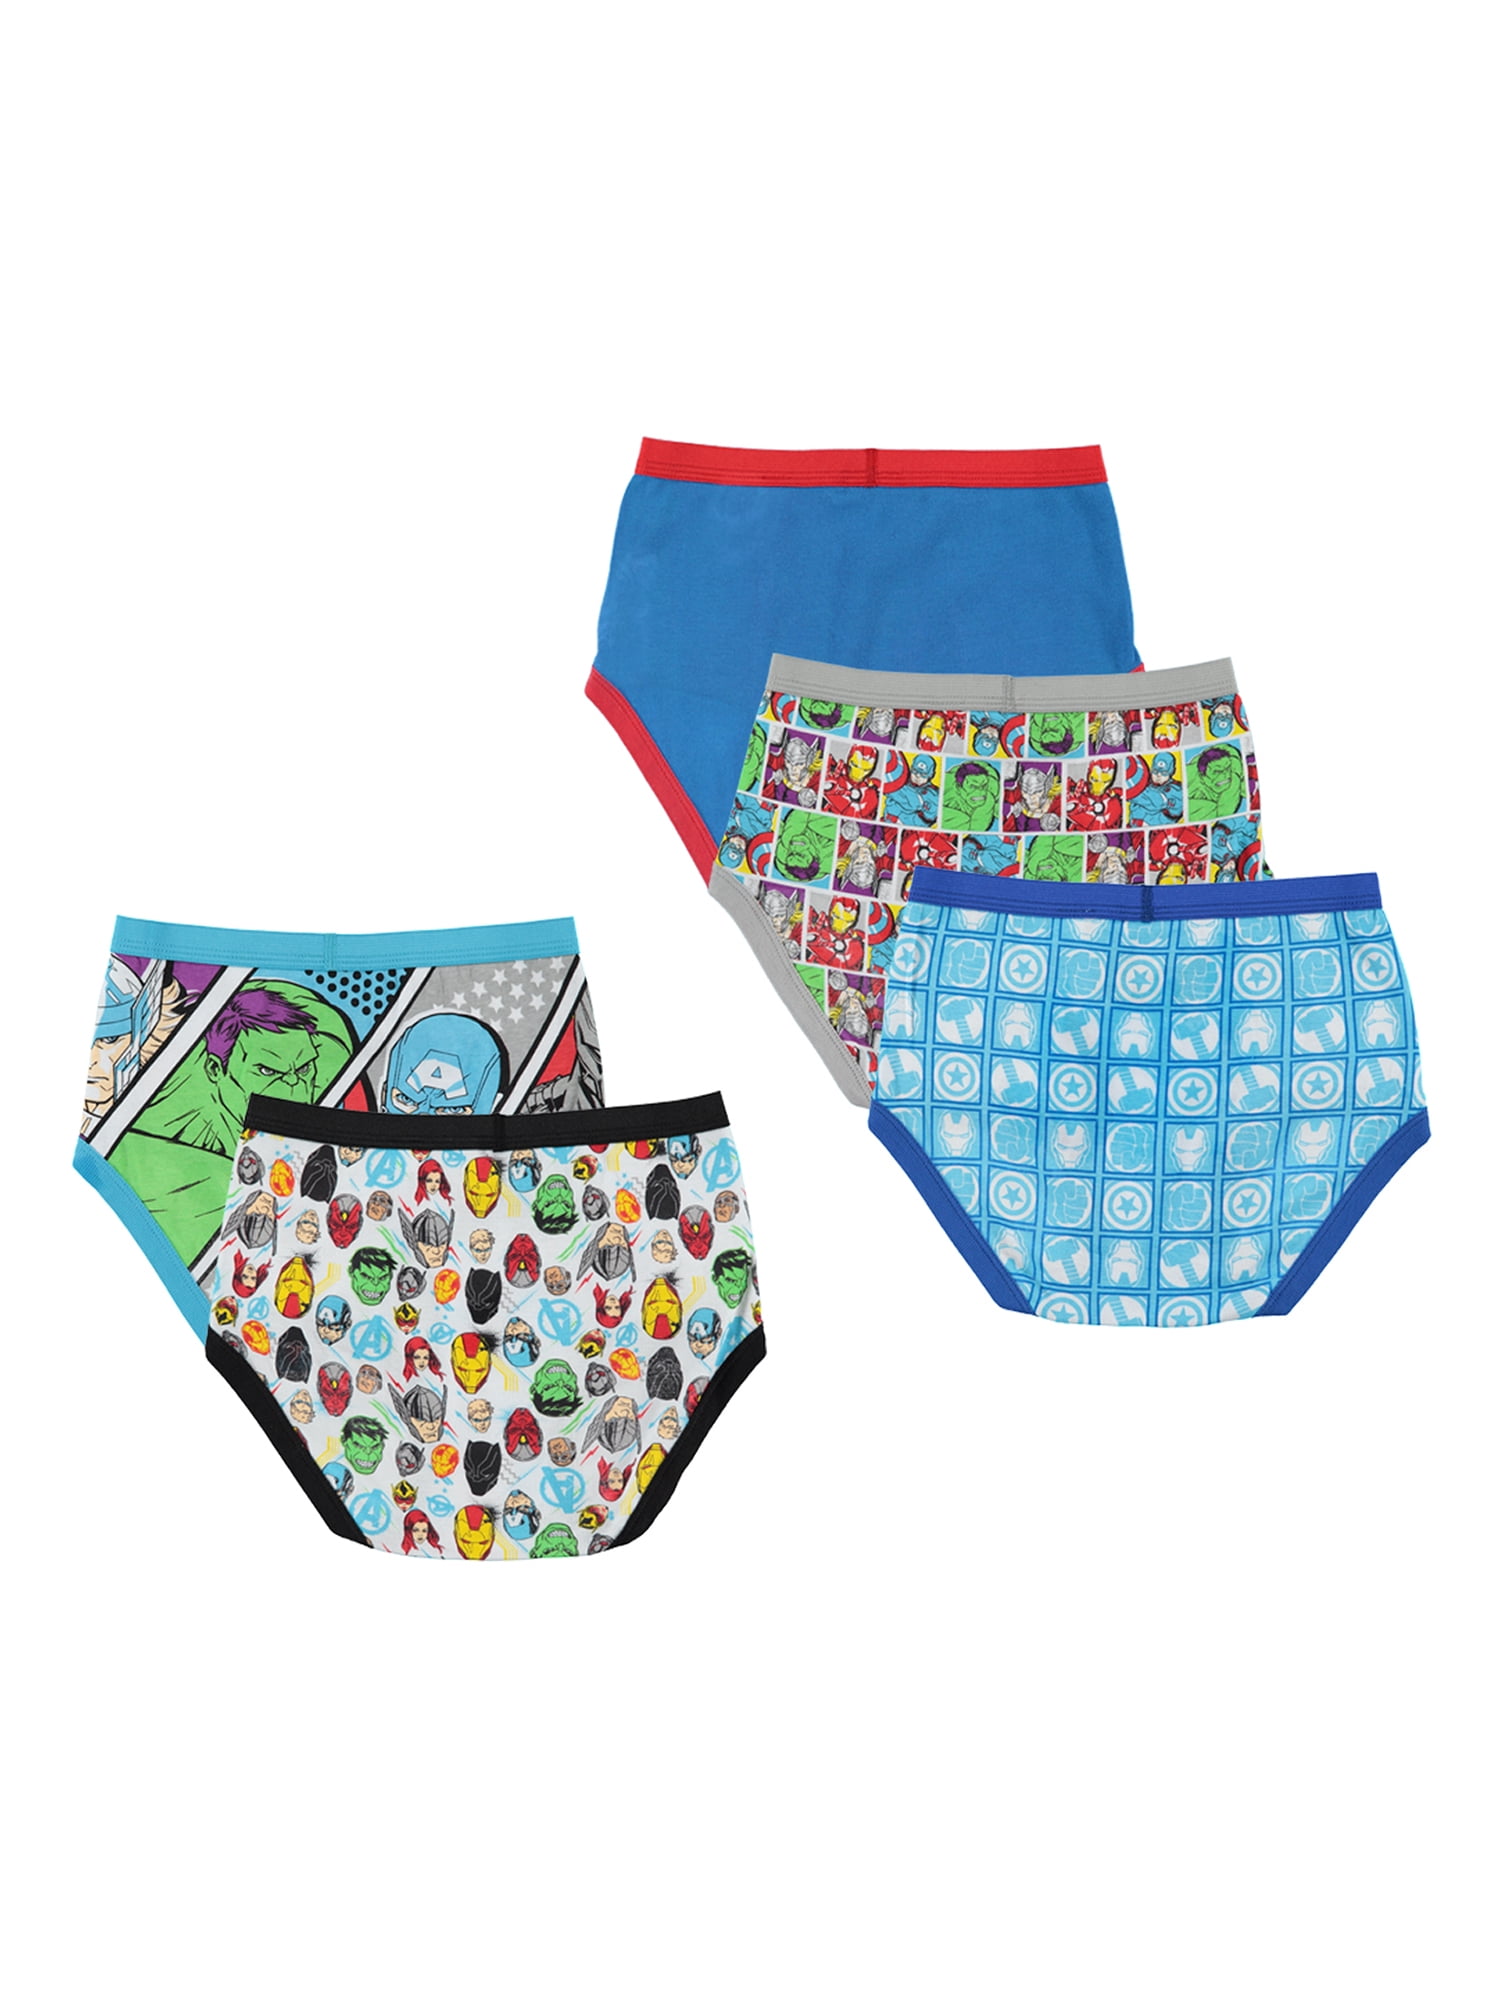 Marvel Boys Toddler Spiderman 100% Combed Cotton Underwear - Import It All